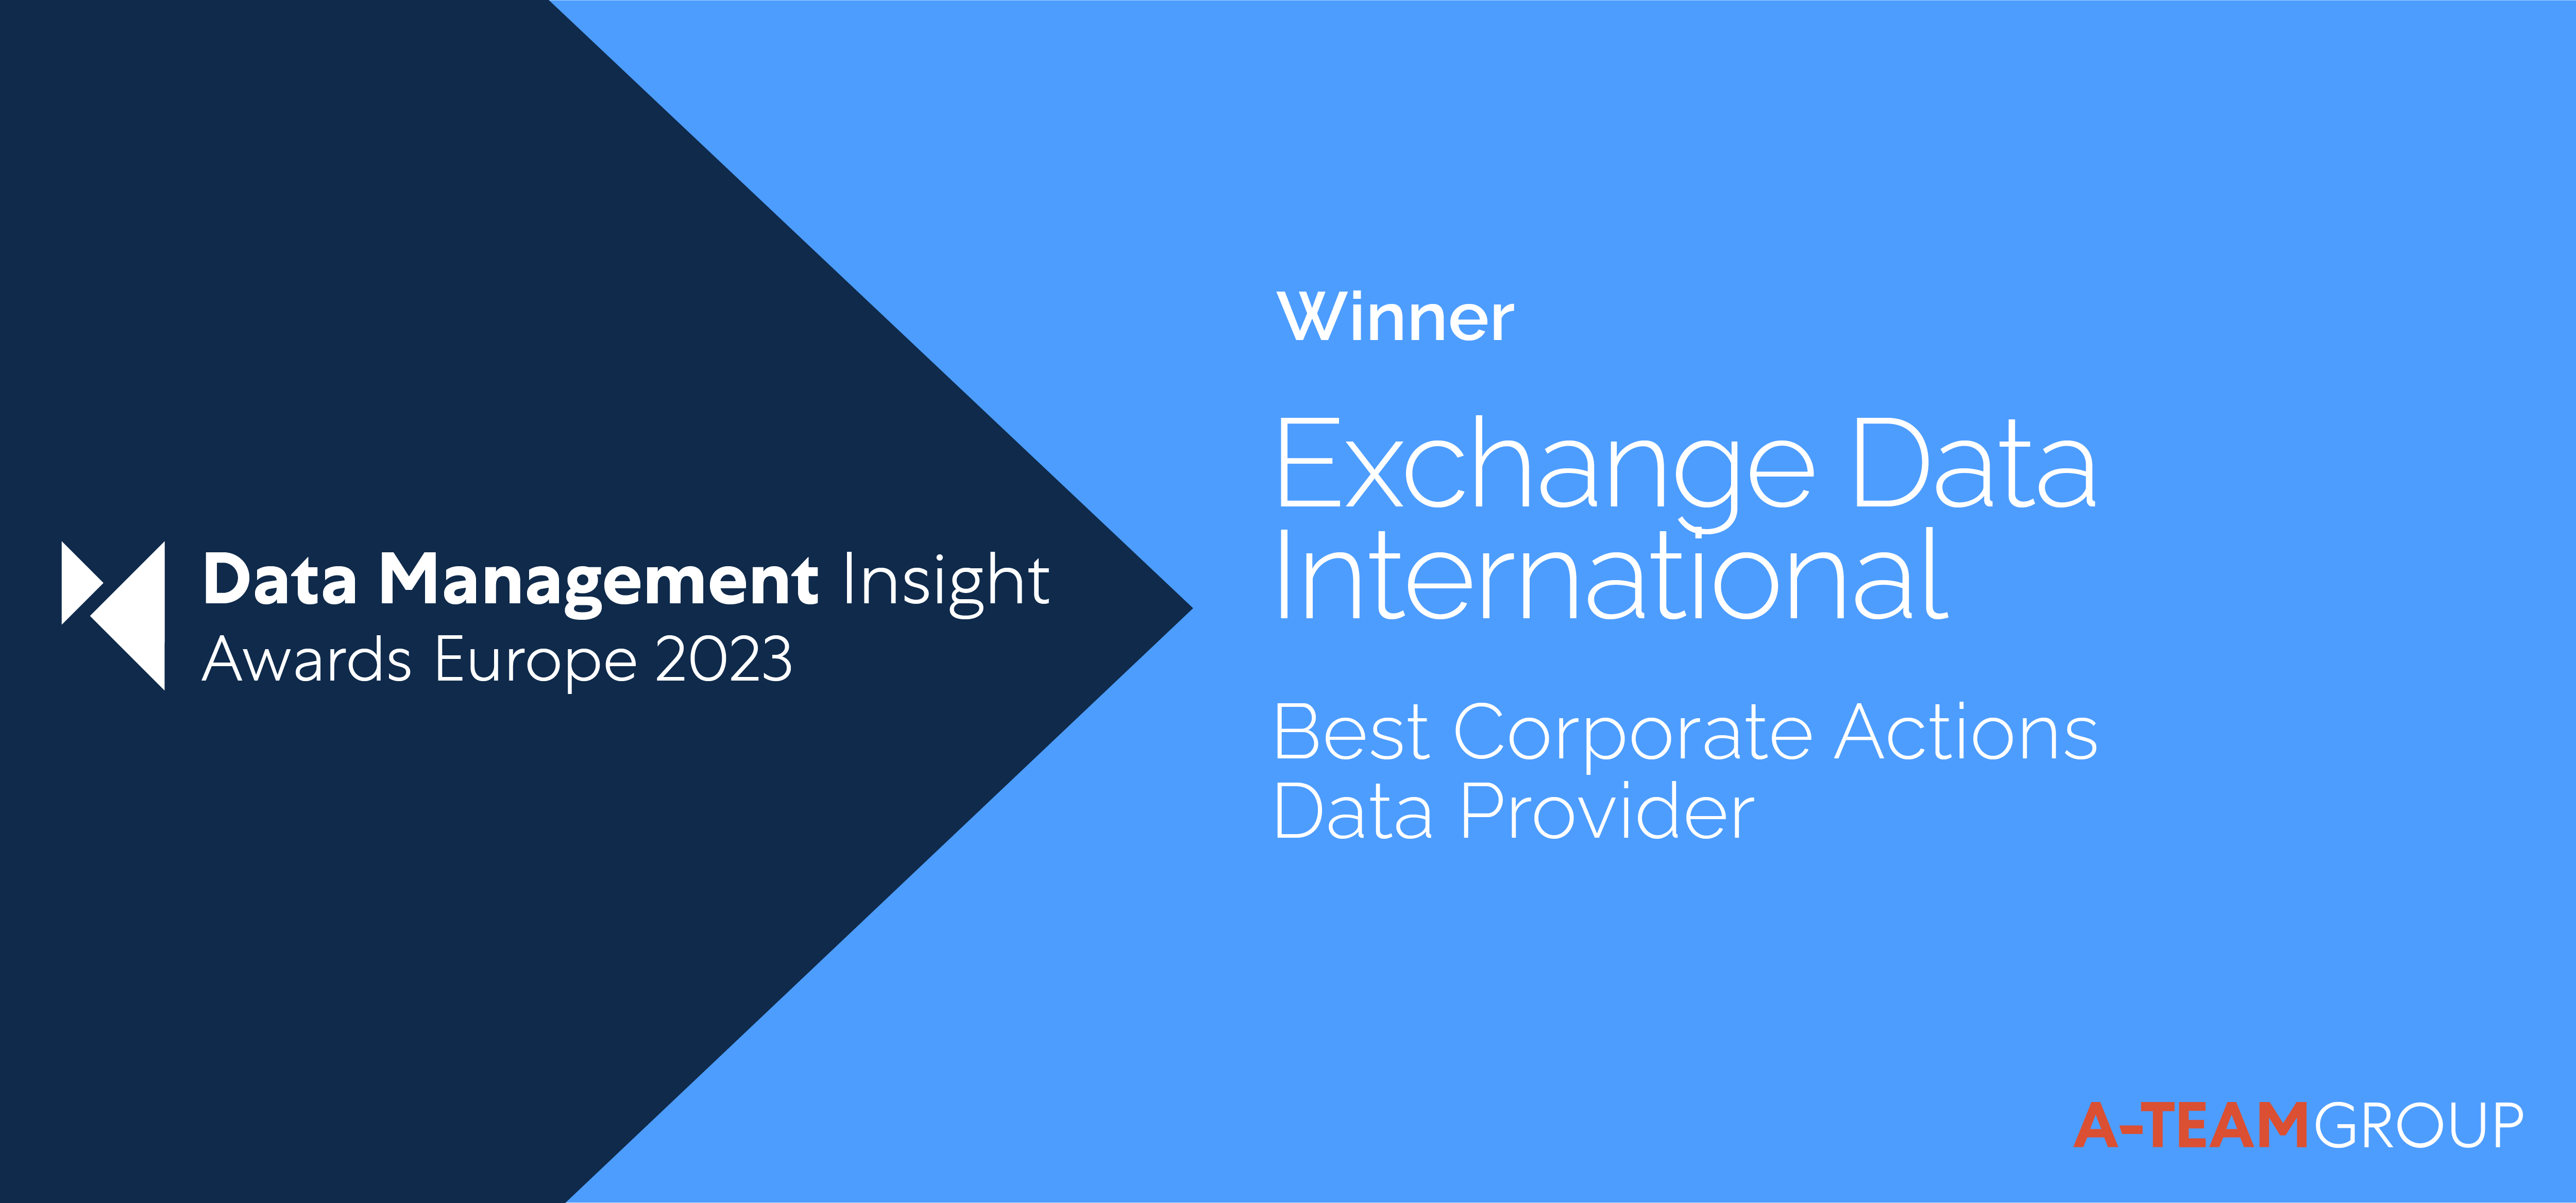 DMI Awards - Best Corporate Actions Data Provider